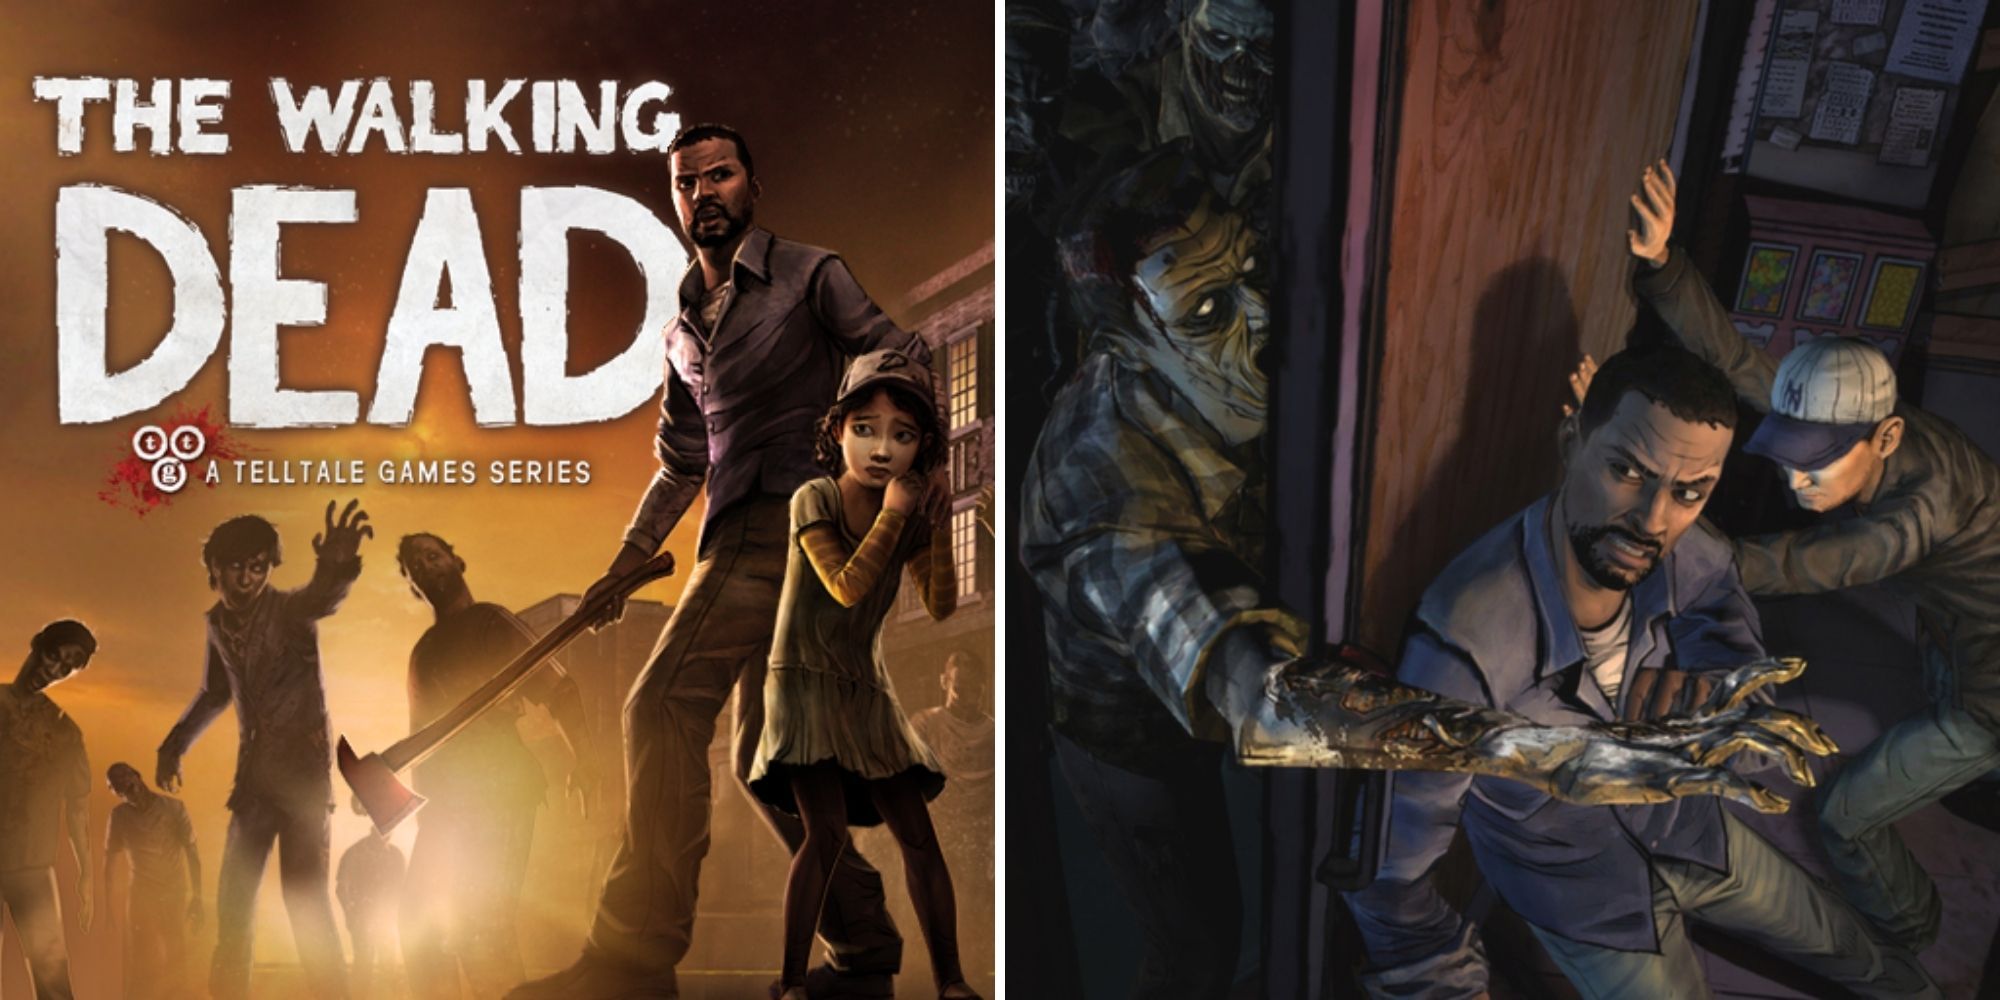 The Walking Dead Season One Mobile Poster Image With Lee, Clementine and Zombies in the distance and Lee and Greg Holding back a door from Zombies